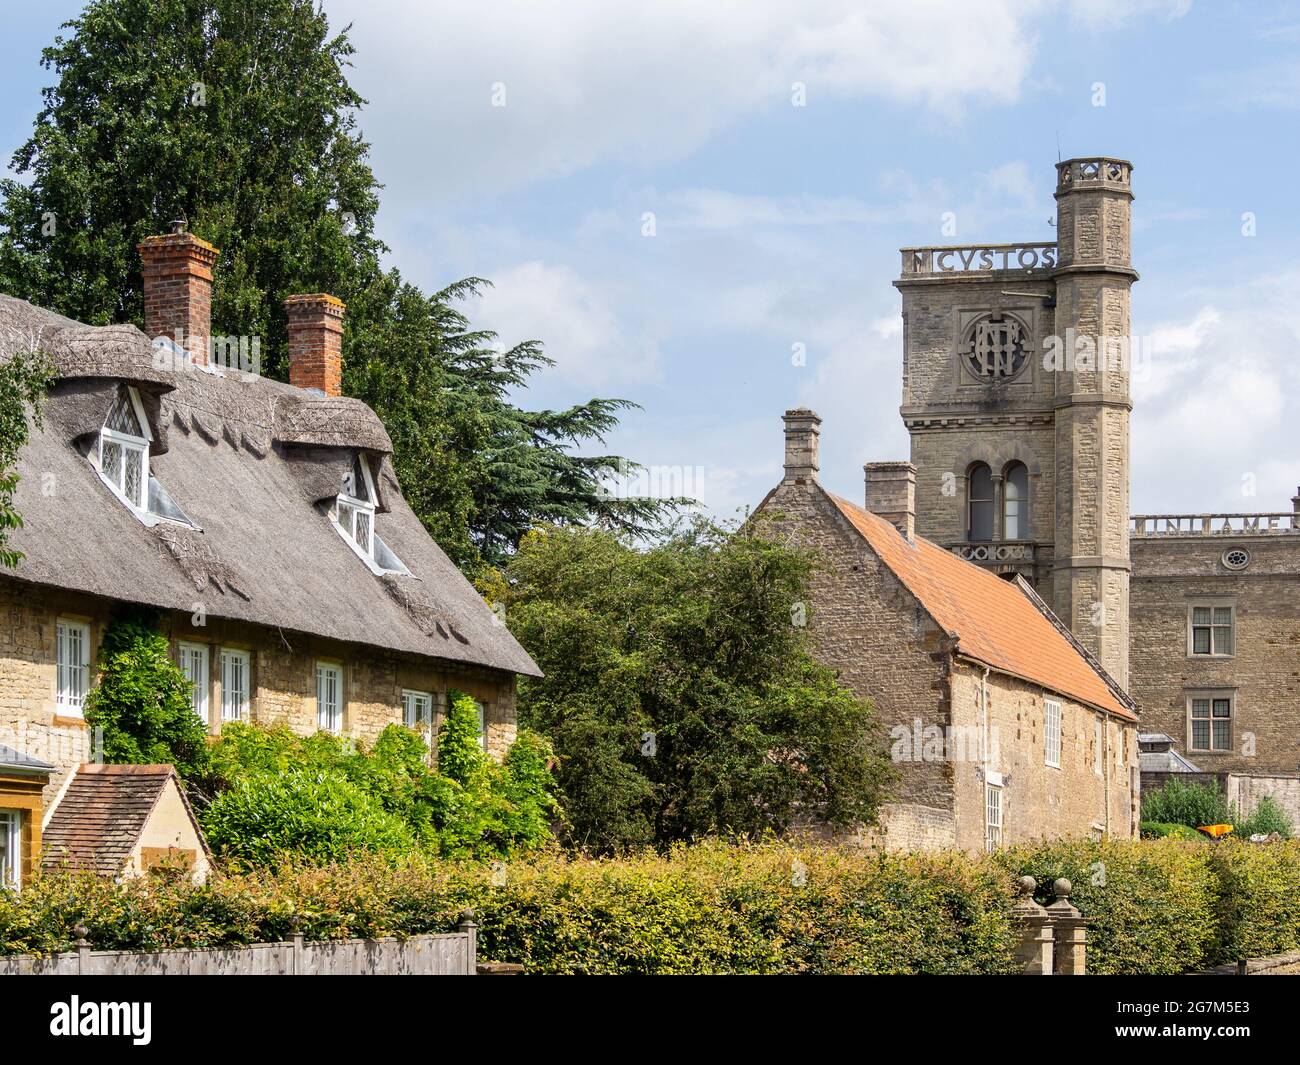 Picturesque scene in the estate village of Castle Ashby, Northamptonshire, UK; thatched cottage and Victorian water tower. Stock Photo